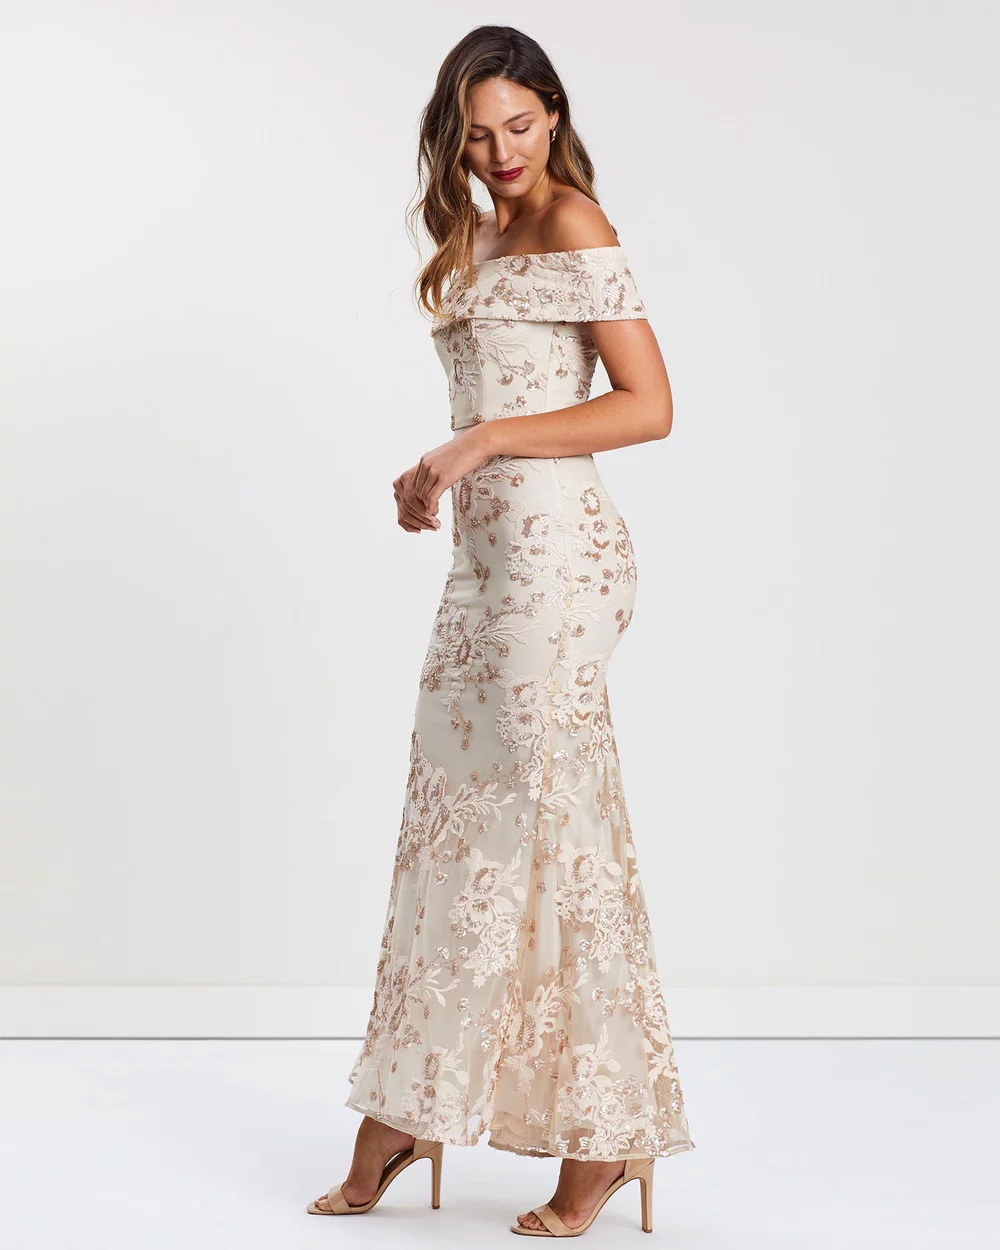 Non-bridal dresses you could 100% get married in |Montique Hope sequin gown, $460 AUD from The Iconic